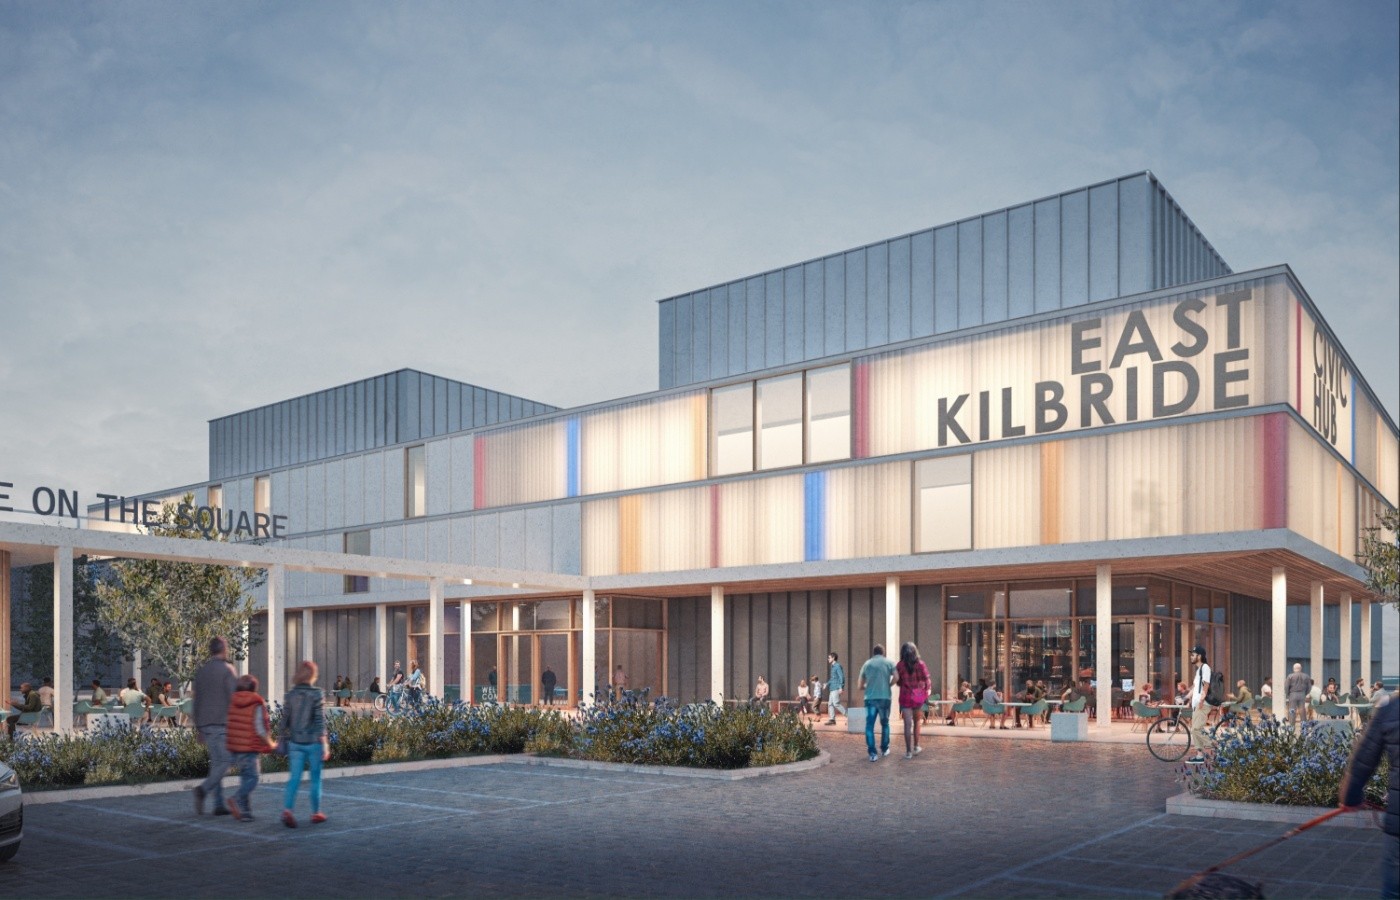 The Civic Hub planned for East Kilbride town centre.